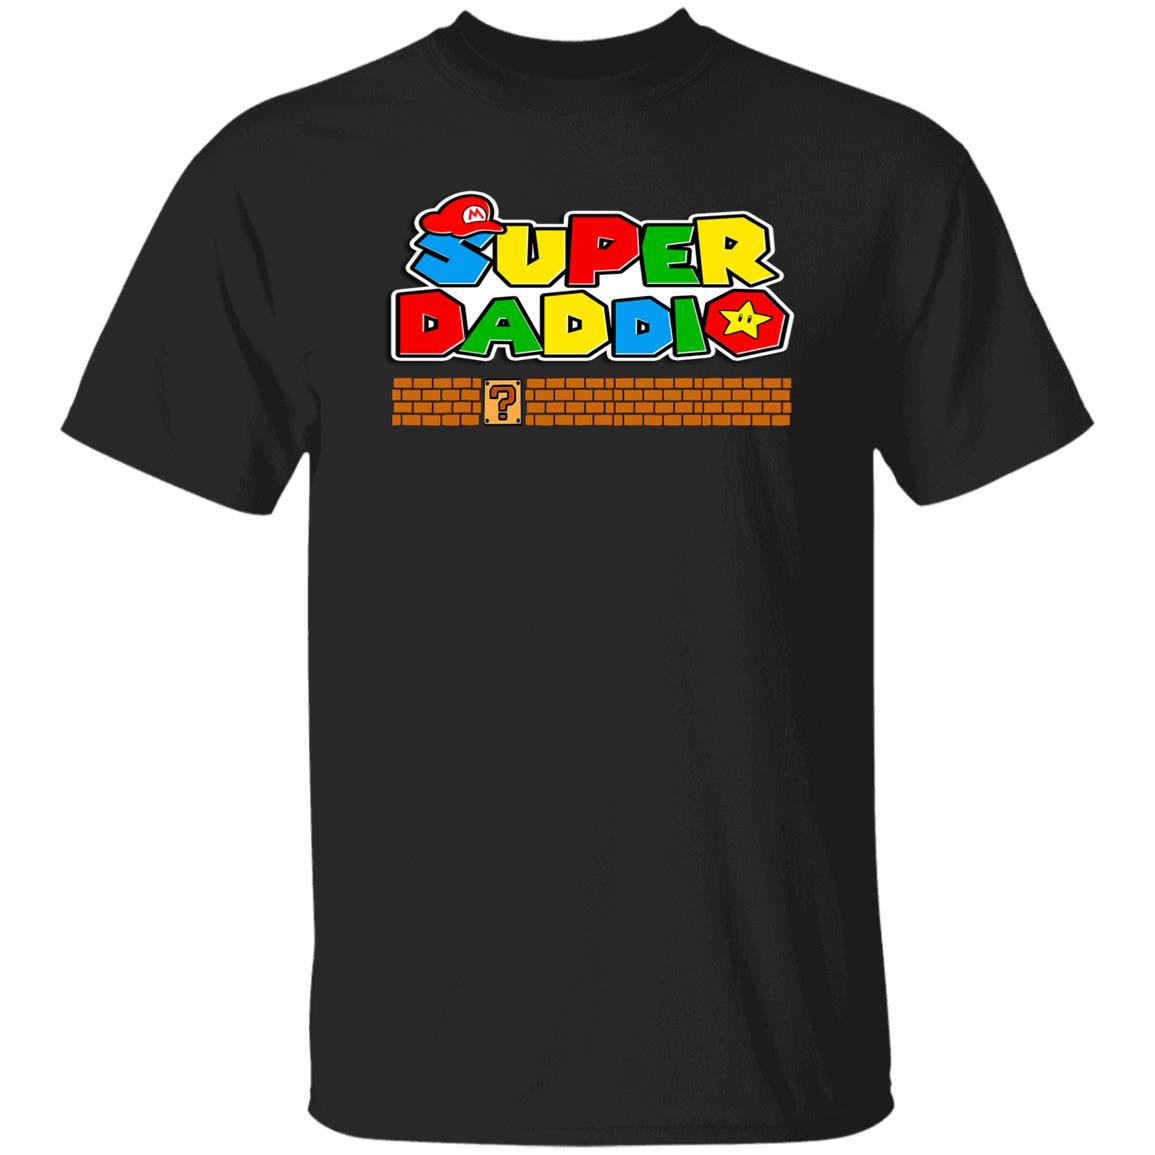 Super Daddio Shirt Funny Gift for Video Gamer Dad